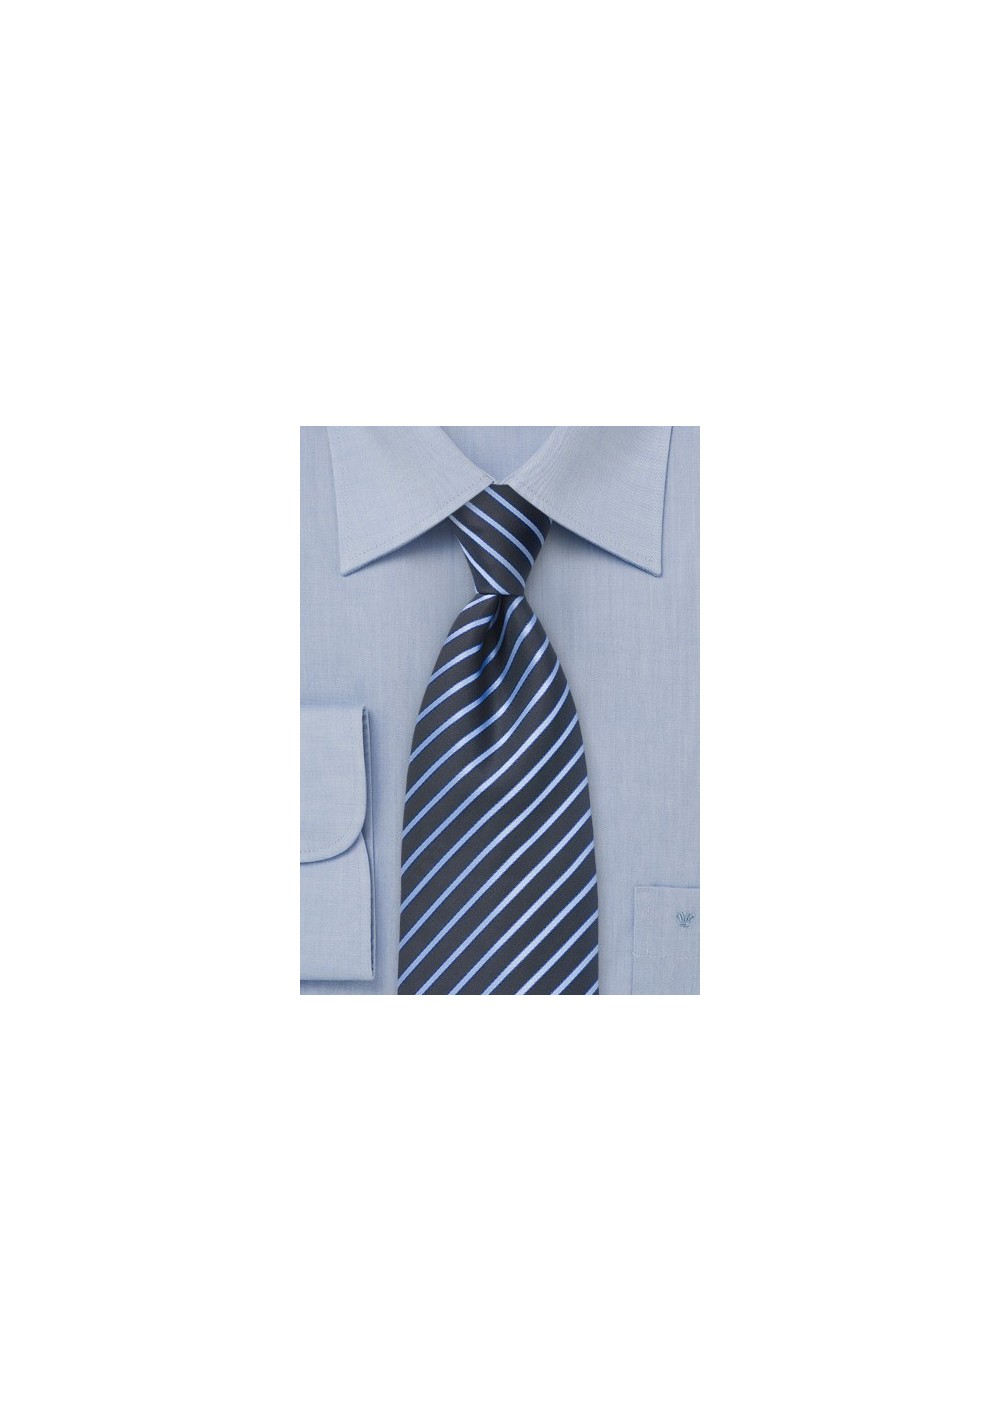 Black and Blue Striped Tie